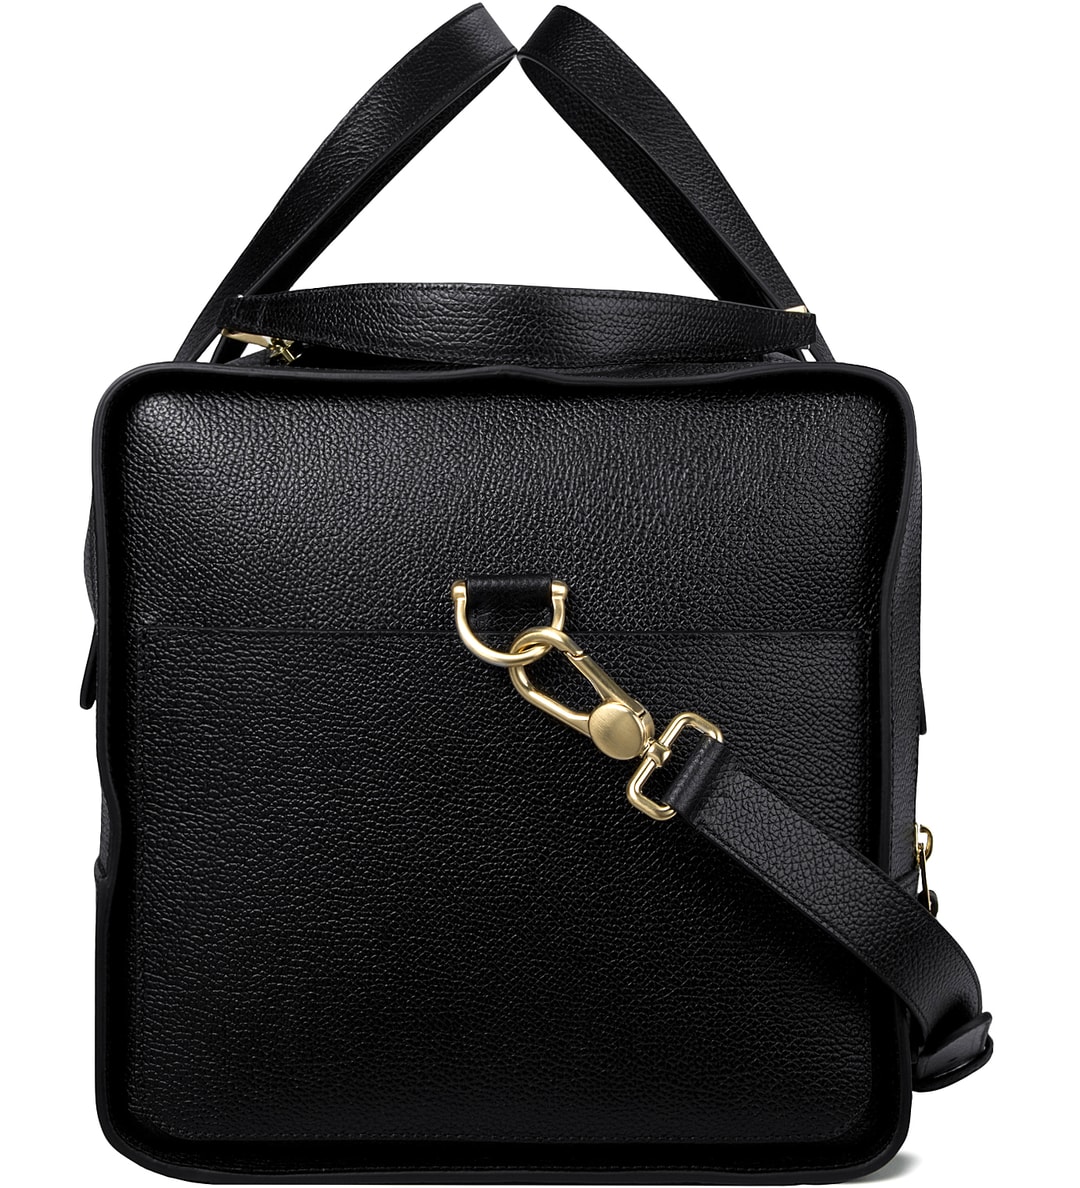 Thom Browne - Black Grained Leather Duffle Bag | HBX - Globally Curated ...